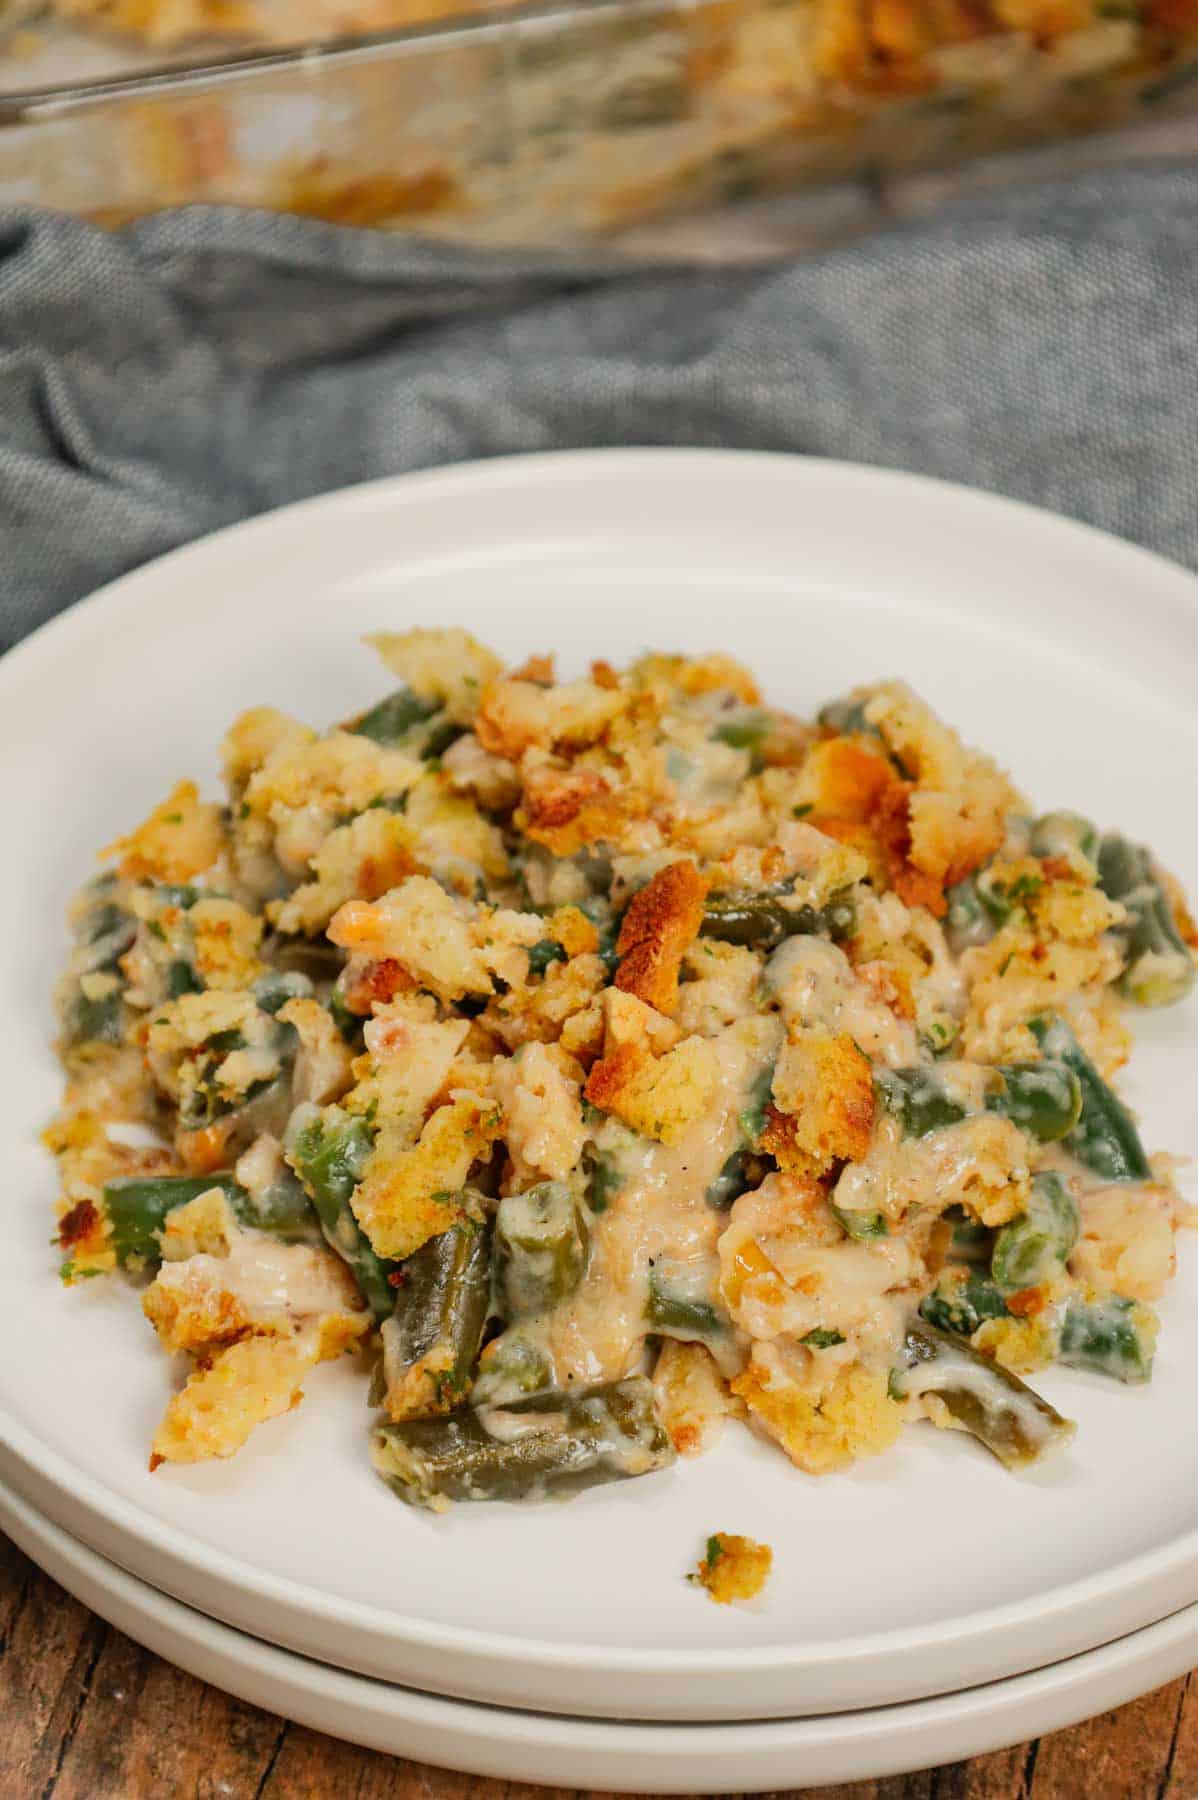 Green Bean Stuffing Casserole is a tasty side dish recipe made with frozen cut green beans, cream of mushroom soup, sour cream, French's crispy fried onions, shredded cheddar cheese, chicken broth and topped with stove top stuffing mix.